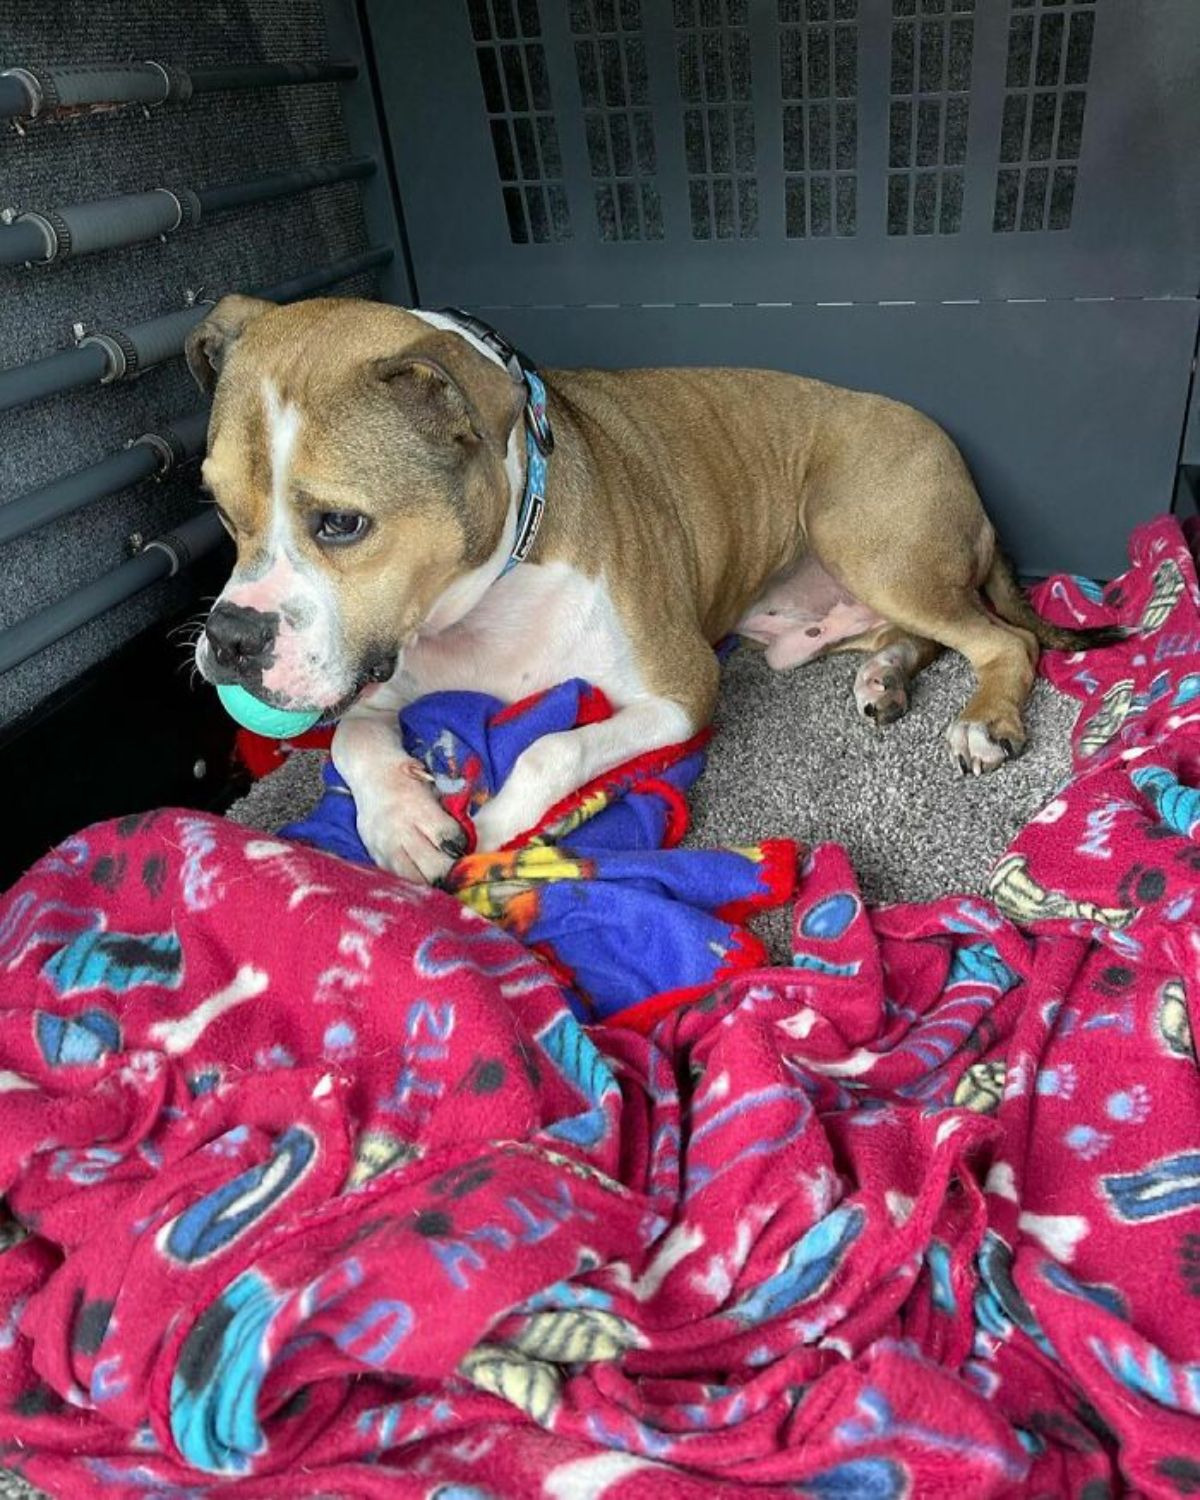 brown and white pit bull holding a green ball in its mouth laying with blue and red blankets